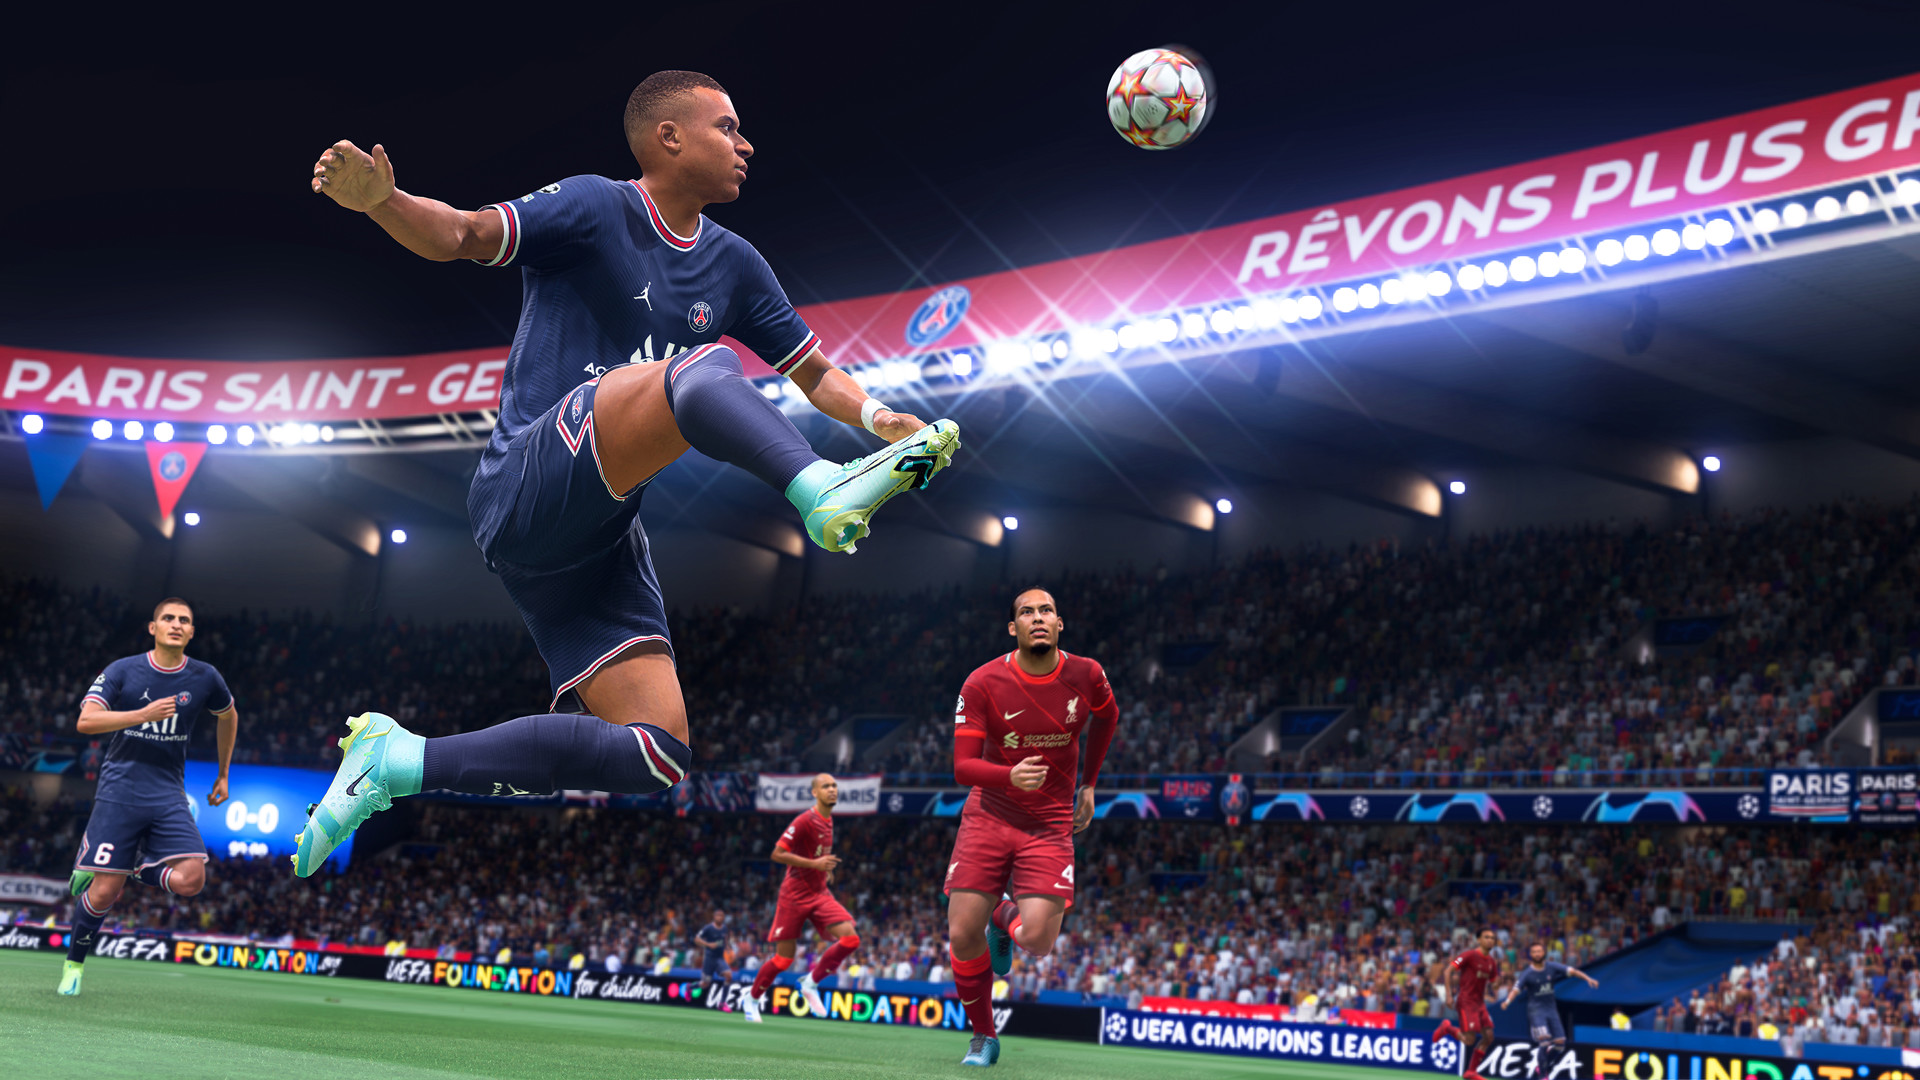 Dive into the Future of Football Gaming: EA Sports FC Mobile